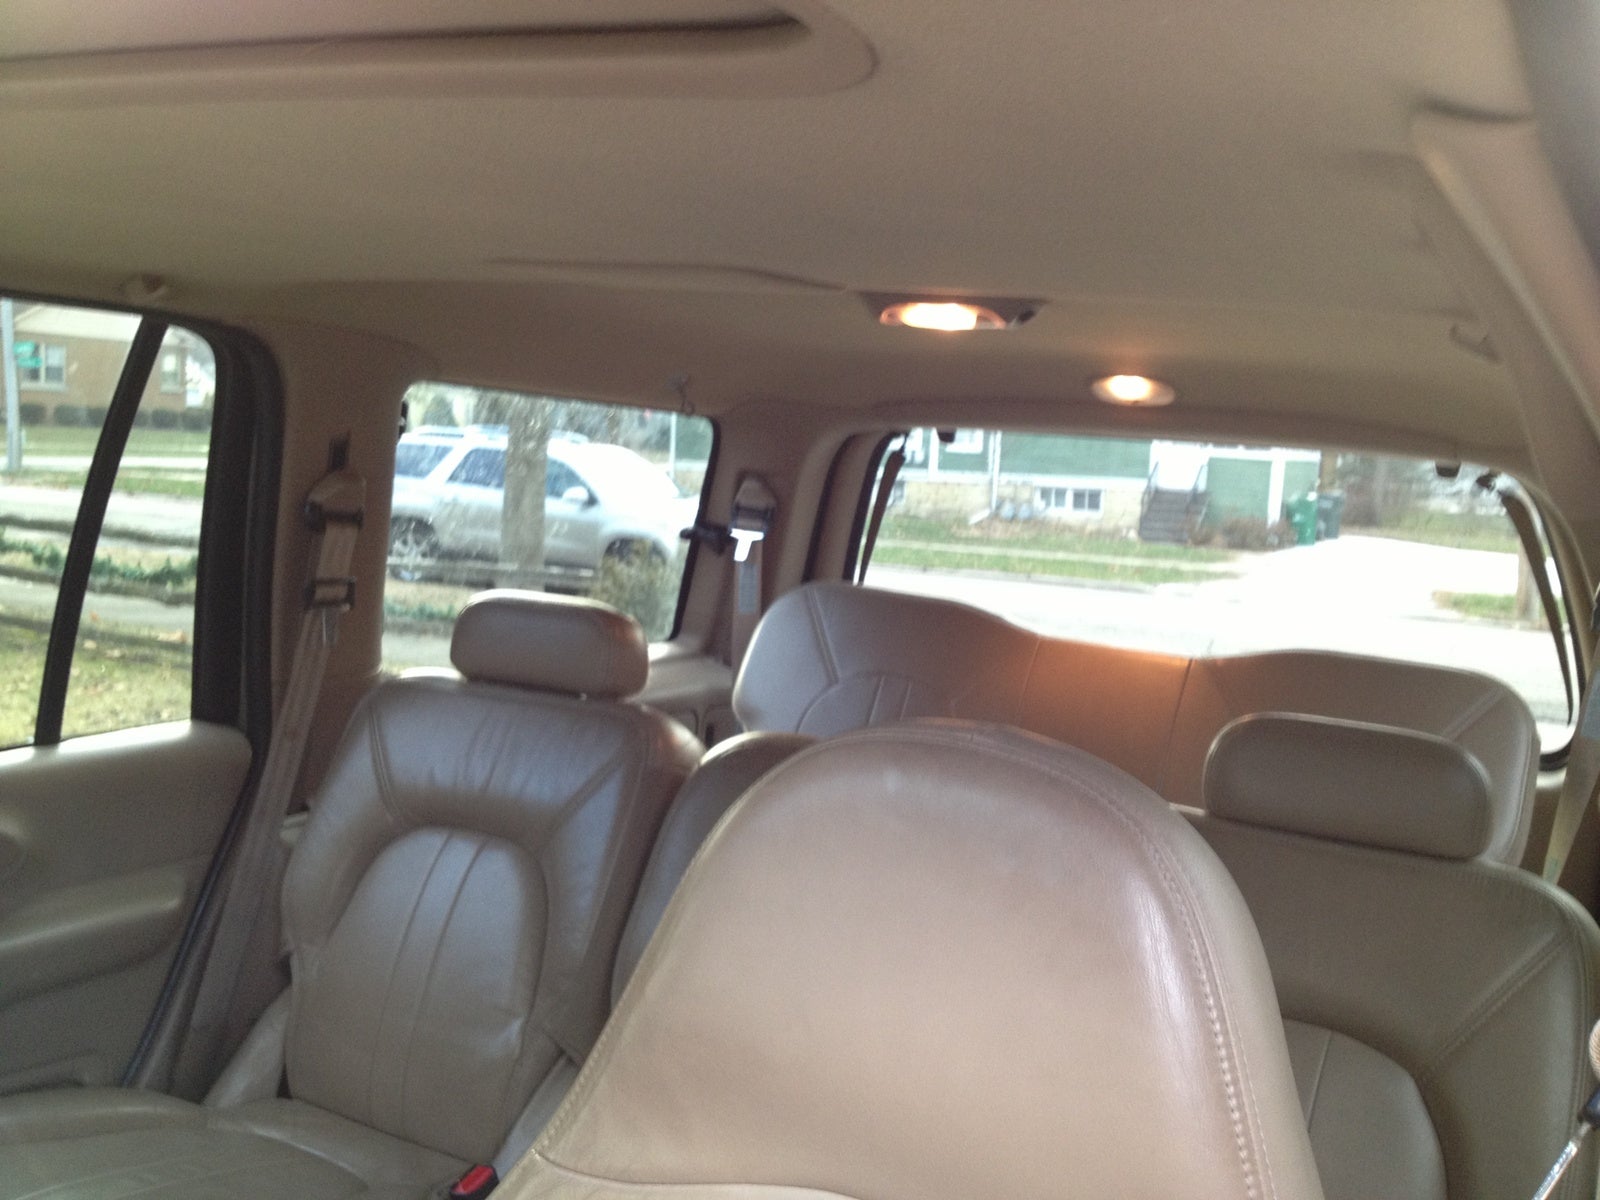 1999 Ford expedition interior dimensions #9